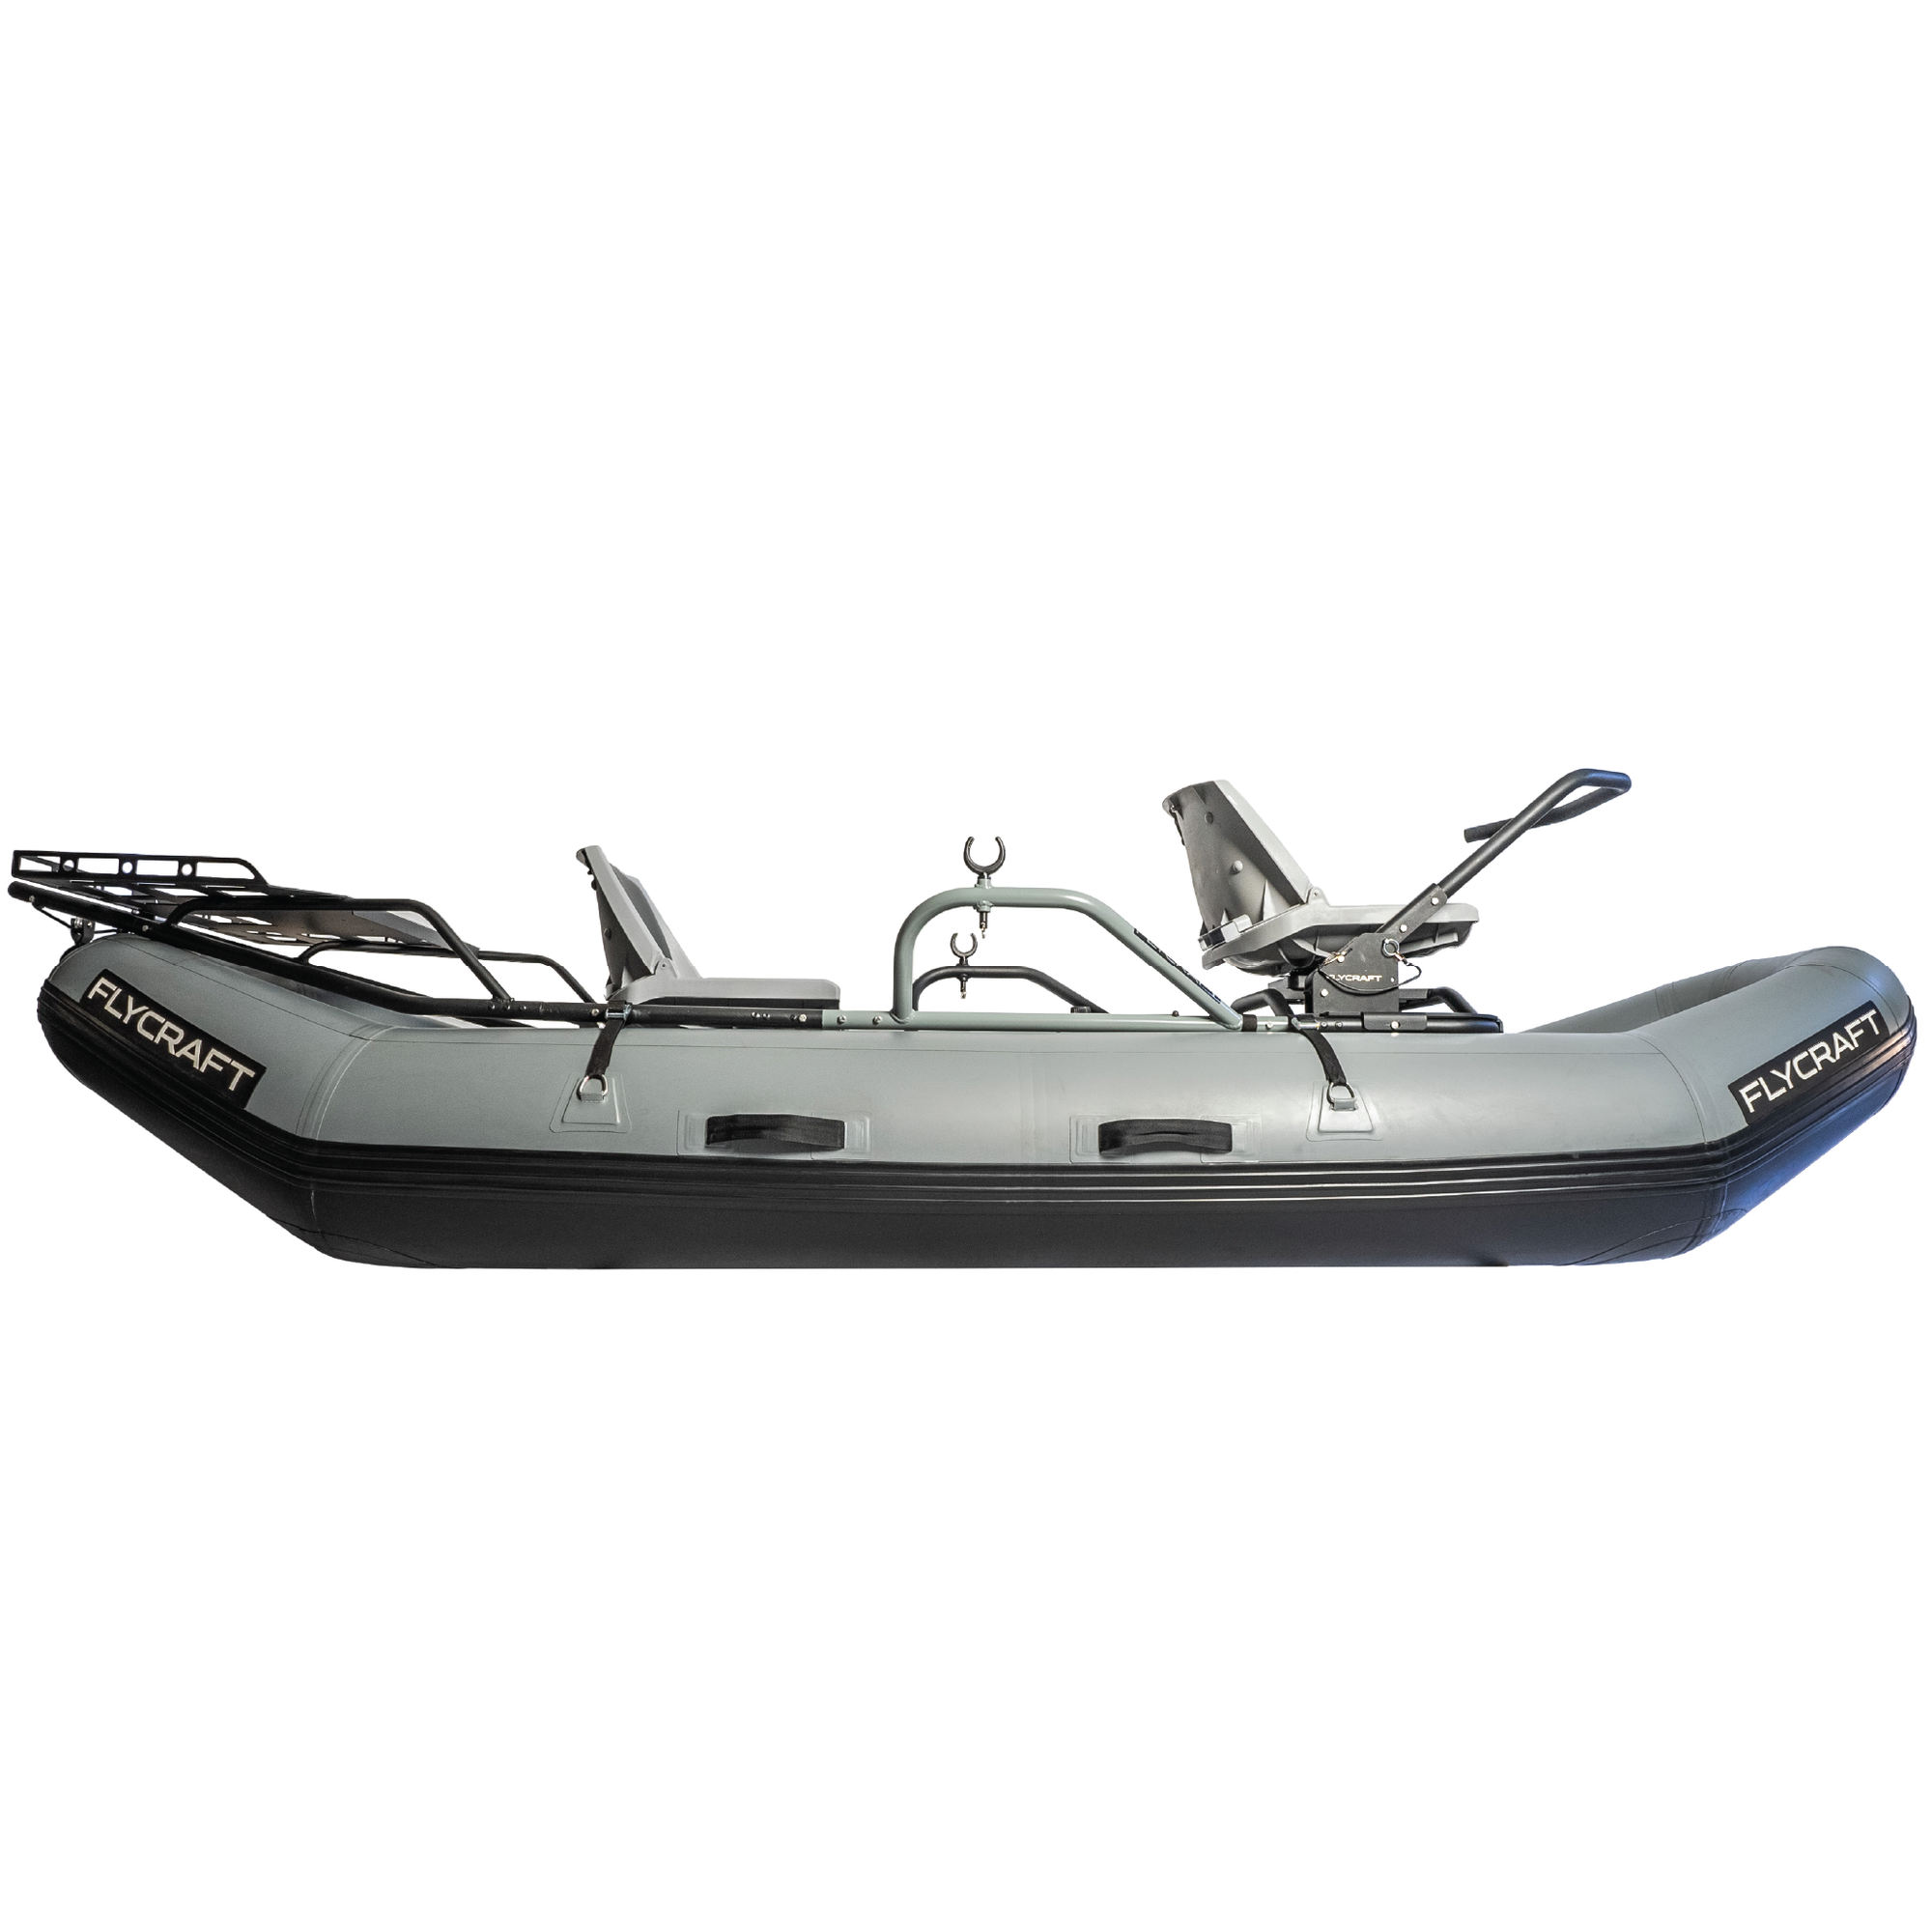 Best Inflatable boat for fishing  Stealth 2.0 Pro Package - FLYCRAFT USA